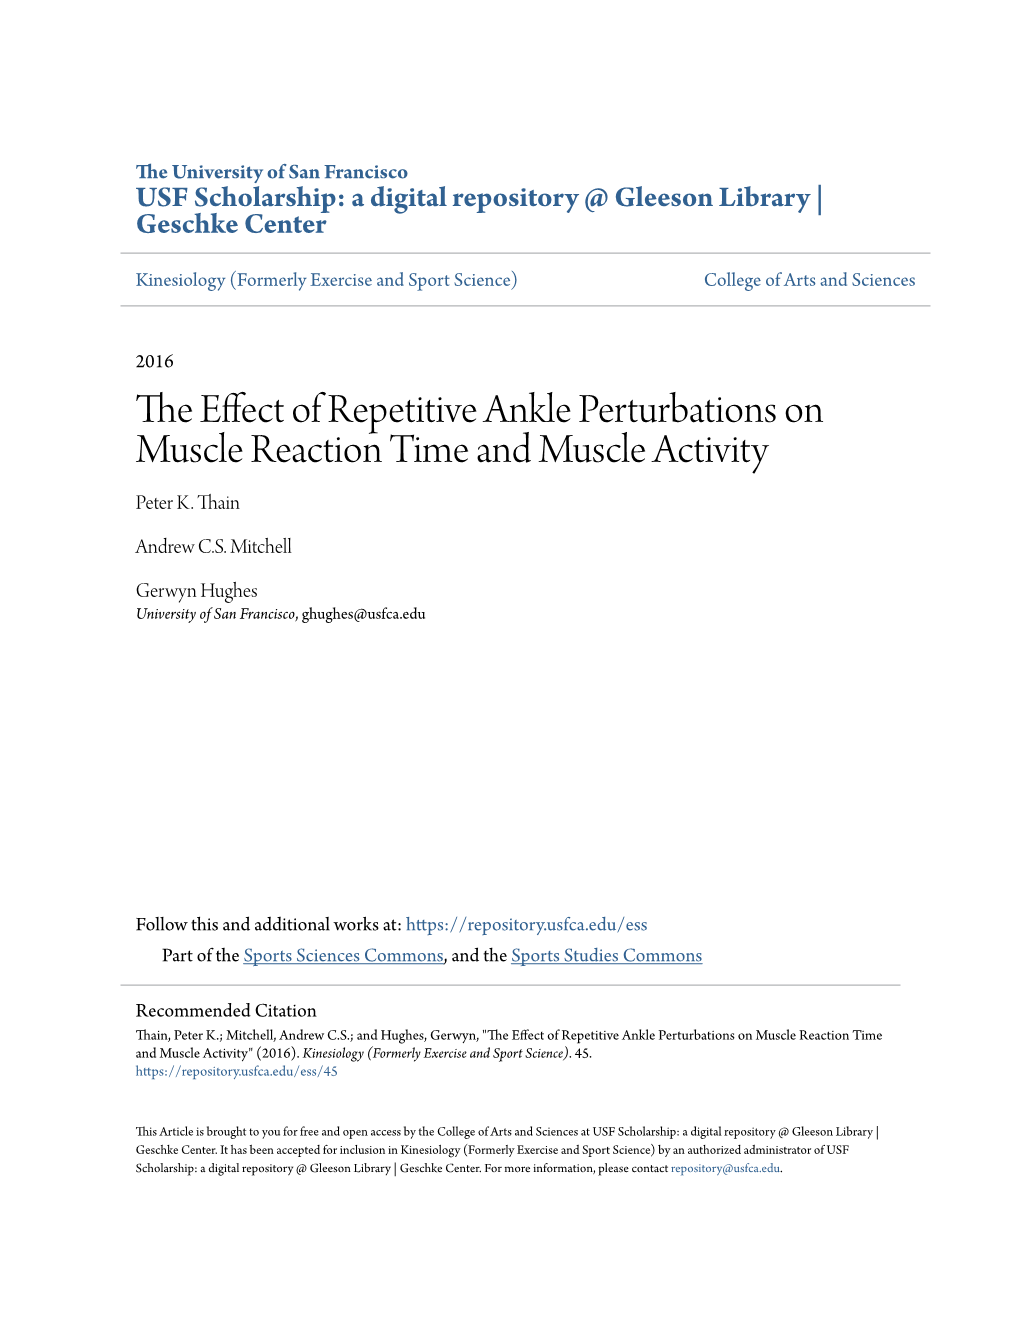 The Effect of Repetitive Ankle Perturbations on Muscle Reaction Time and Muscle Activity" (2016)